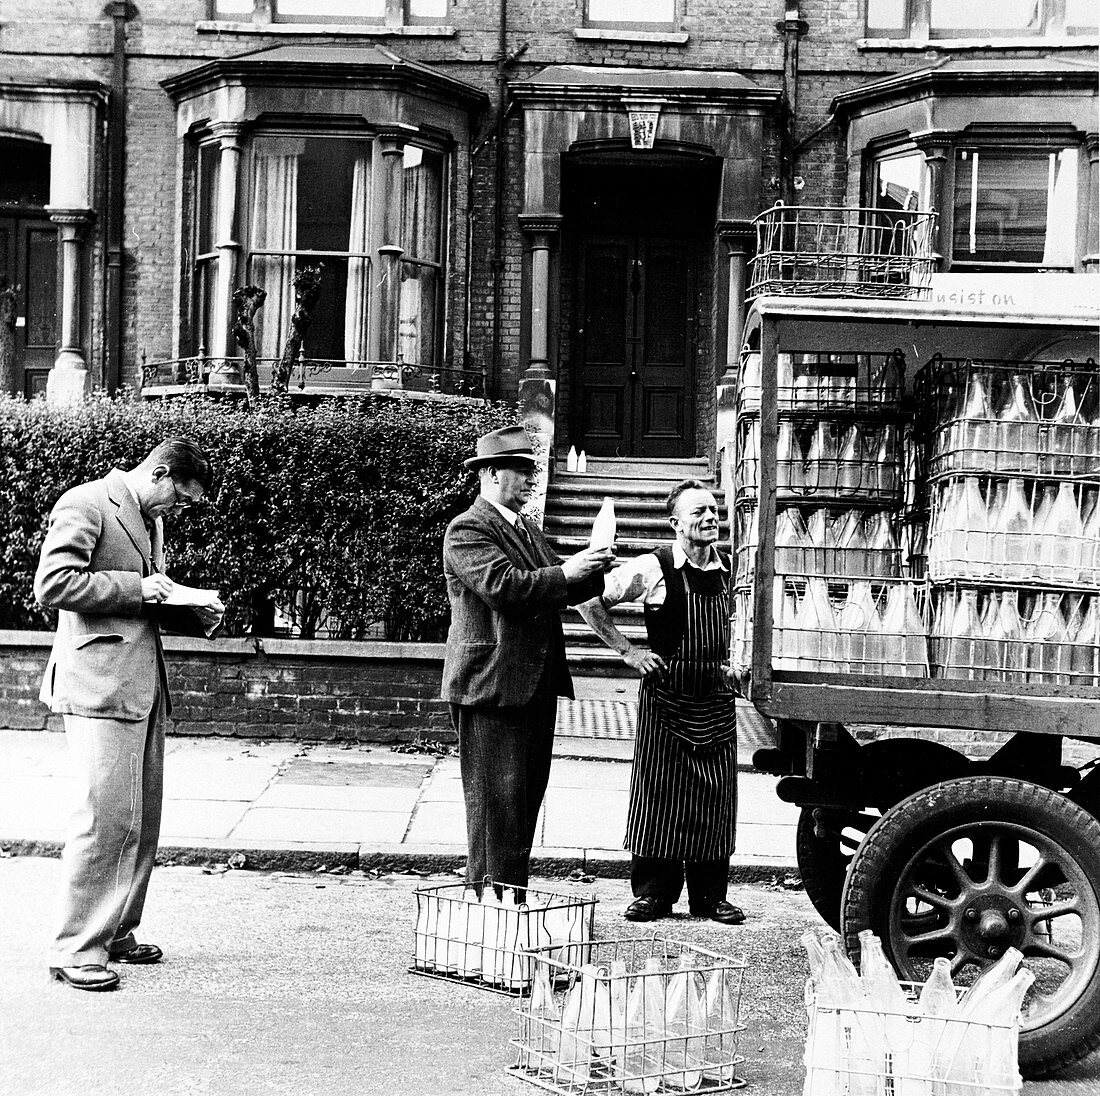 A milkman on his rounds in London, c1950s